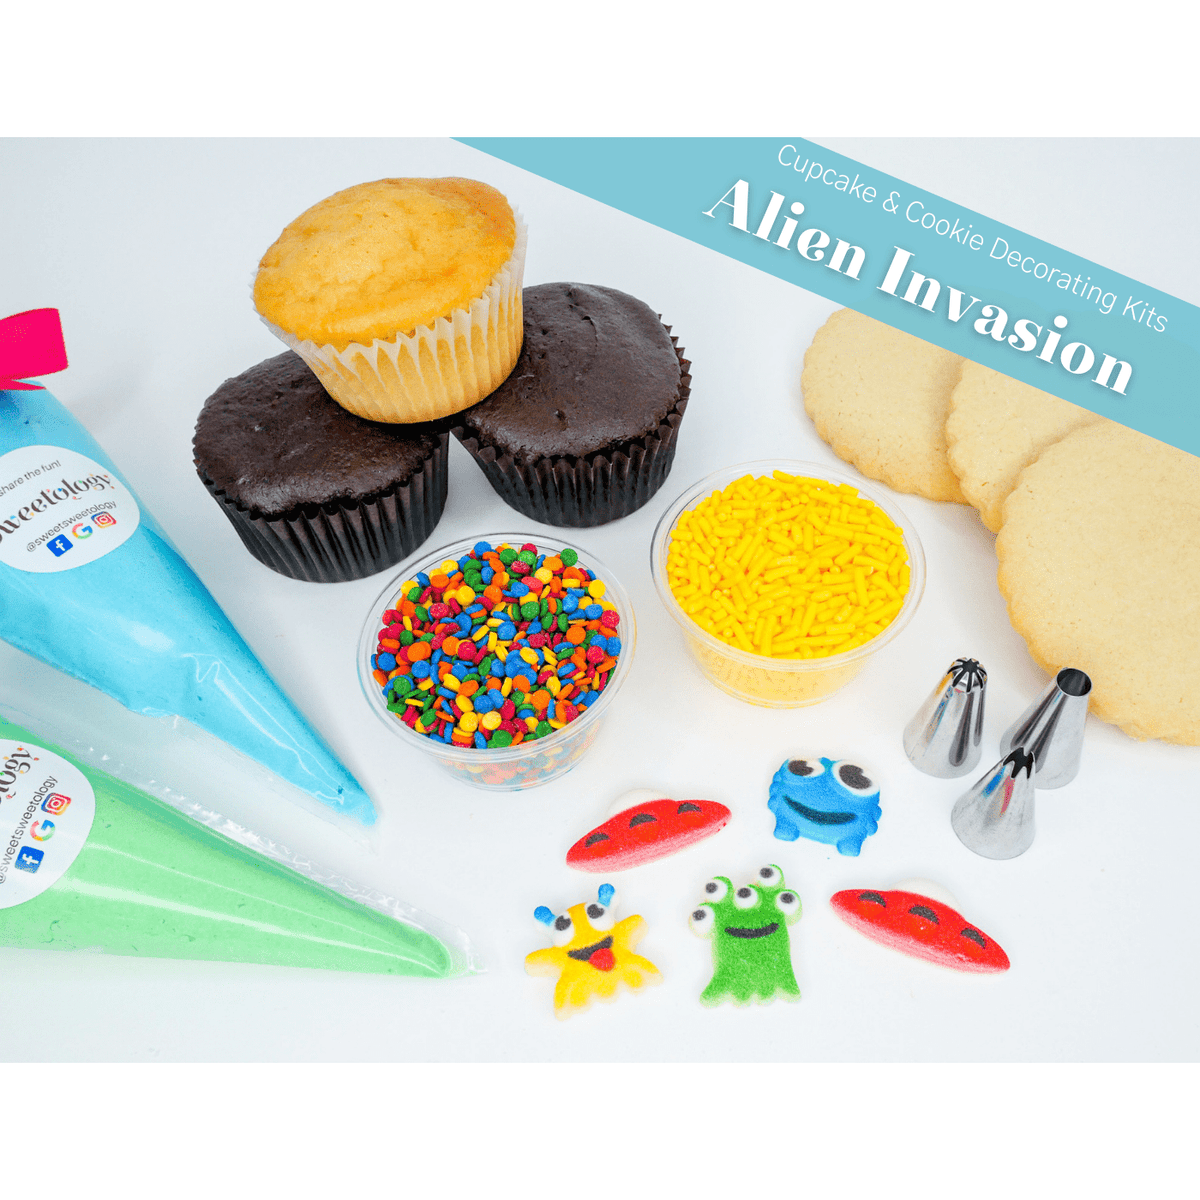 Sweetology Baby Onesies Cupcake and Cookie Decorating Kit